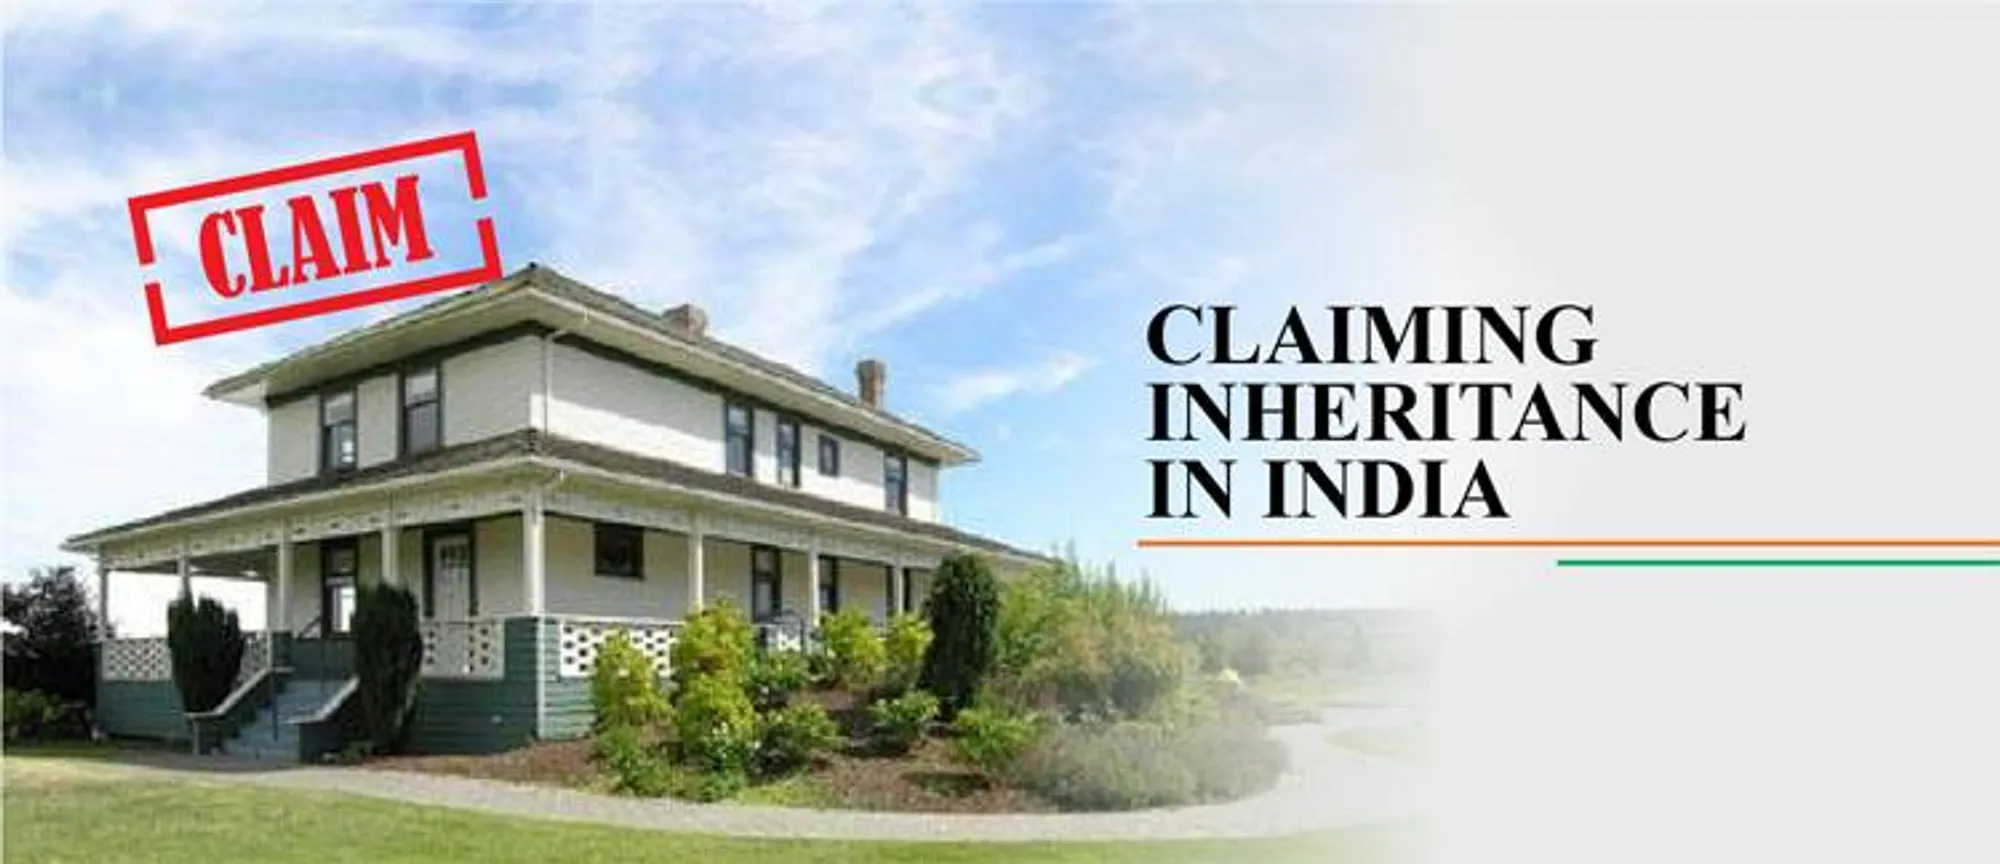 Claiming Inheritance in India - Law and Processes